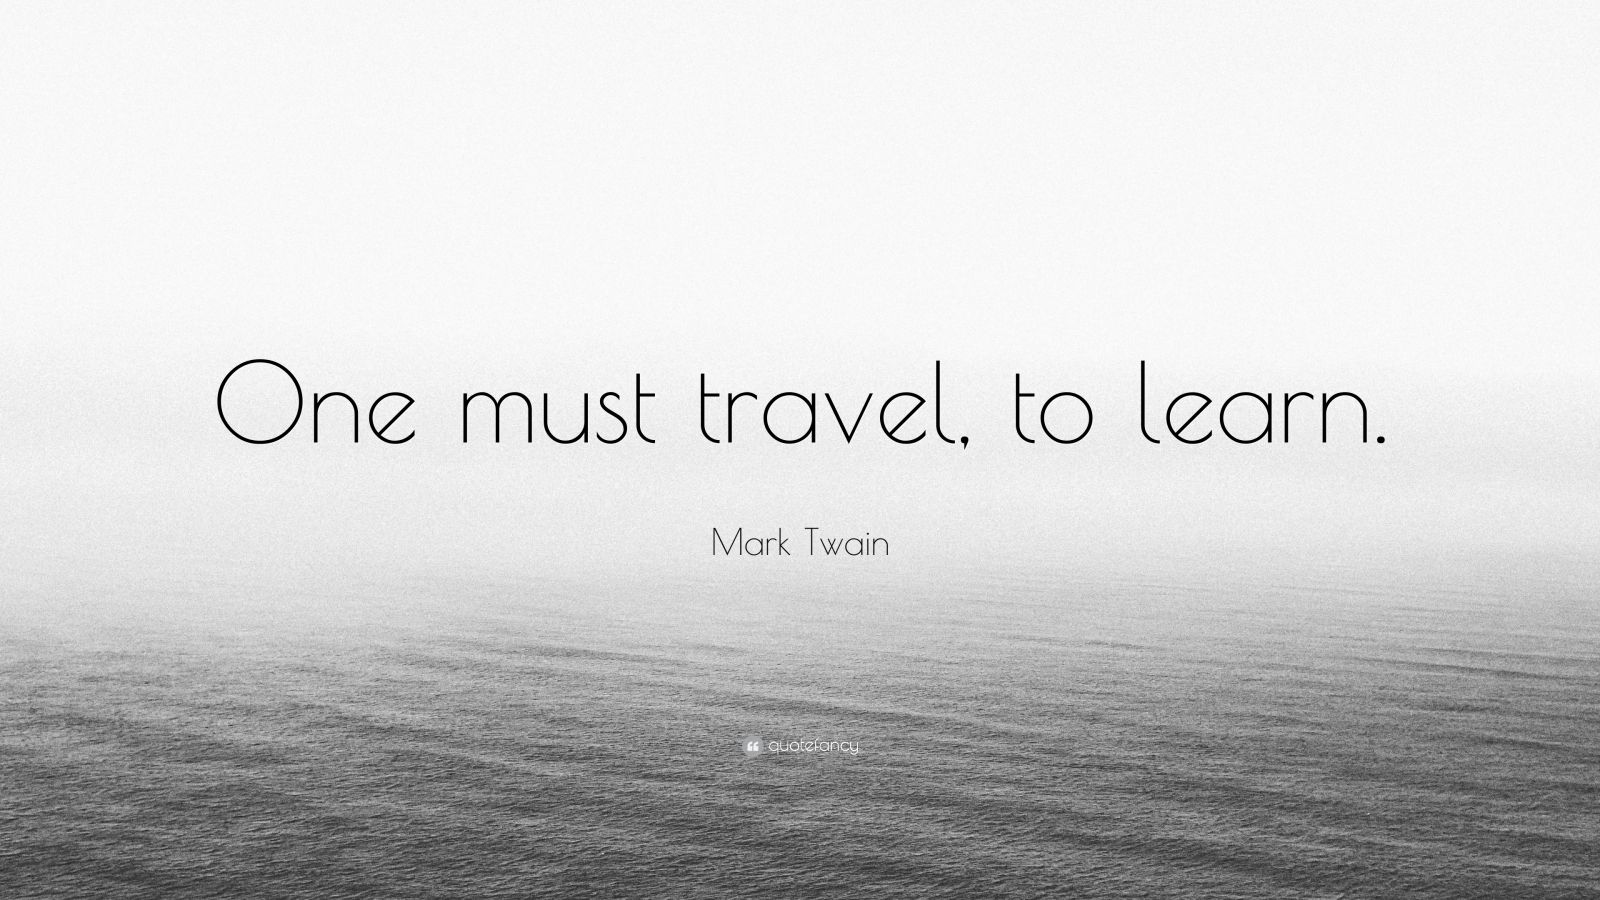 Mark Twain Quote: “One must travel, to learn.” (12 ...